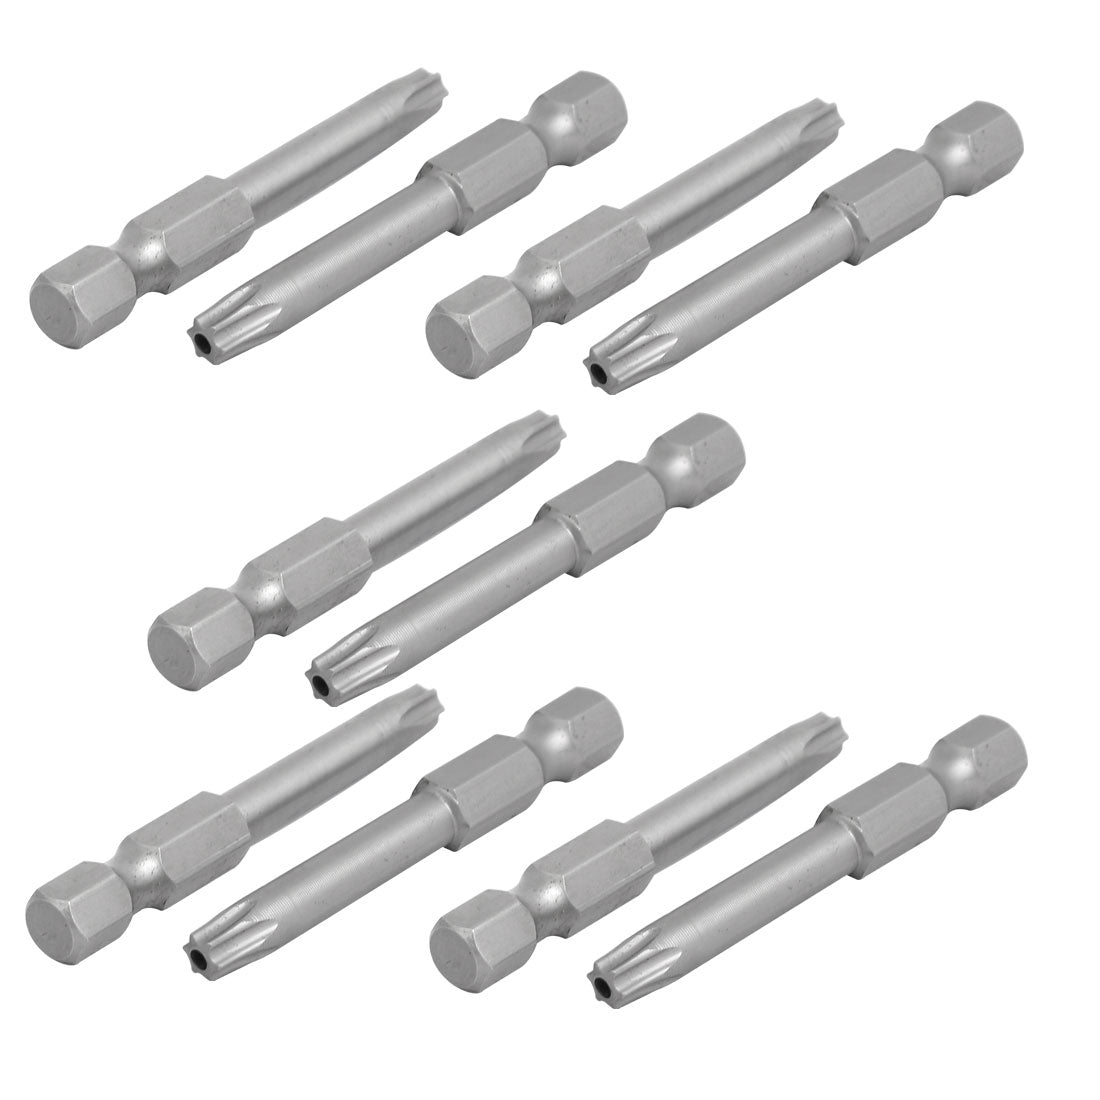 uxcell Uxcell 1/4" Hex Shank 3.8mm Tip T25 Magnetic Torx Screwdriver Bits 50mm Length 10pcs Gray